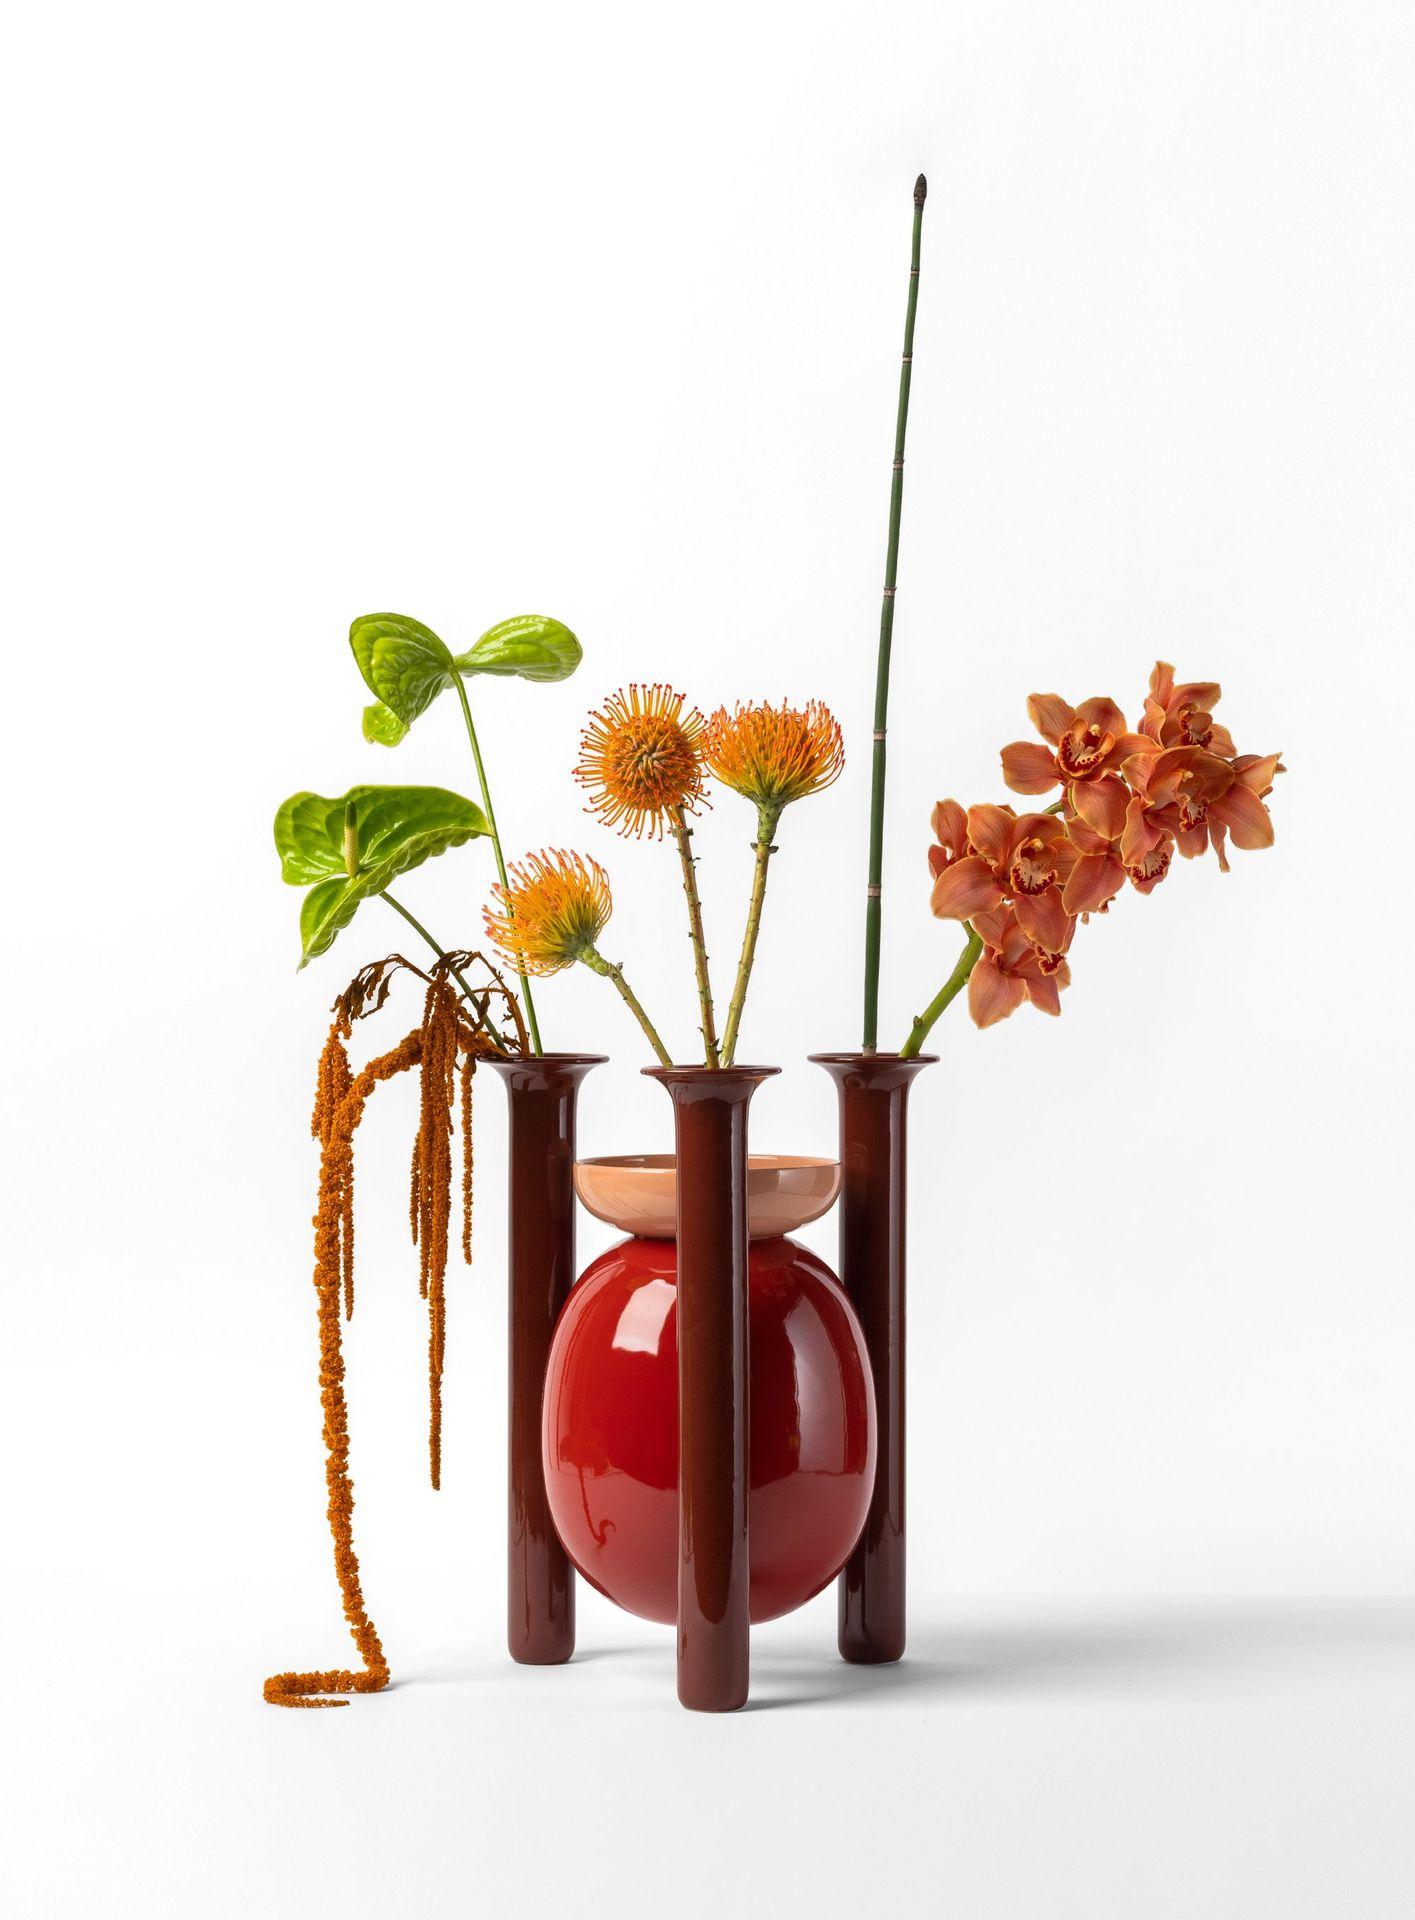 Number 3 explorer vase by Jaime Hayon.
Dimensions: D 30 x H 40 cm.
Materials: glazed ceramic.
Also available in different colours. 

